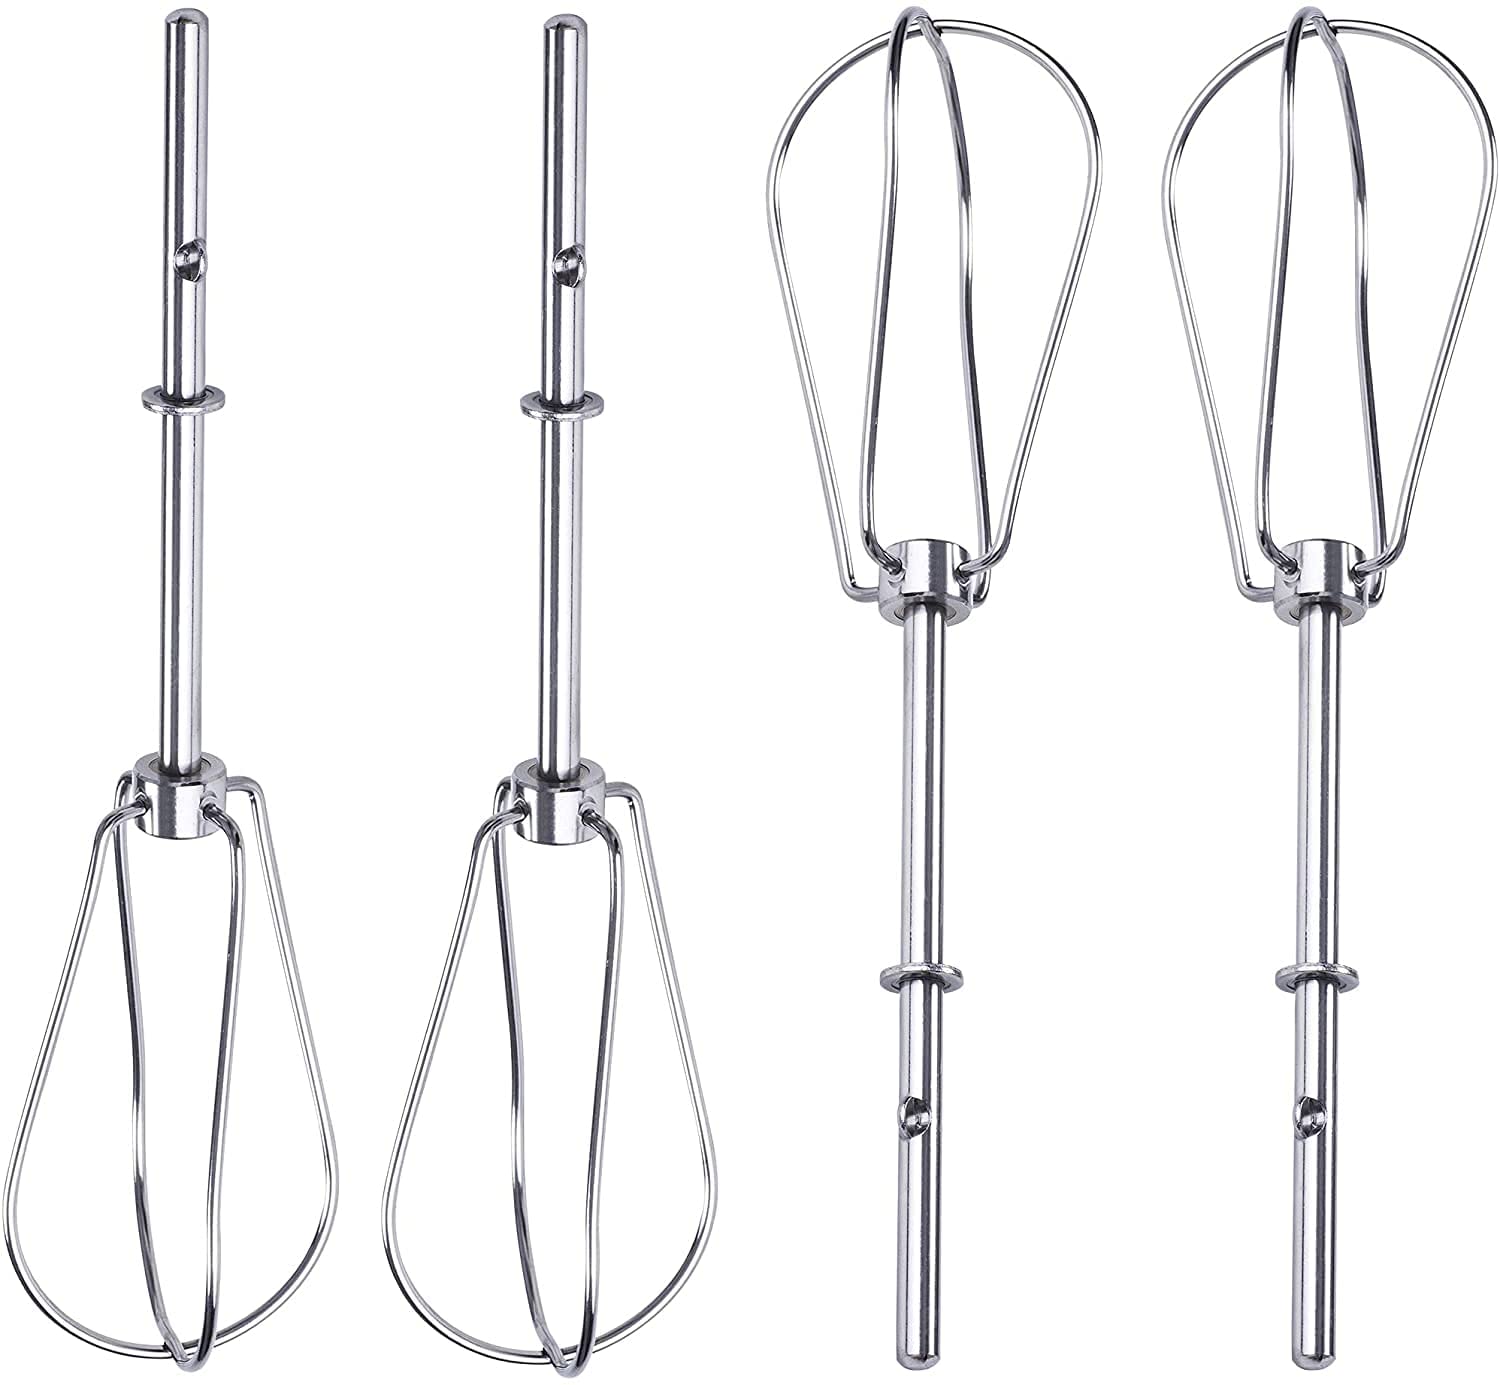 https://www.dontwasteyourmoney.com/wp-content/uploads/2021/11/bluestars-whirlpool-kitchenaid-compatible-hand-mixer-replacement-beaters-4-count-hand-mixer-replacement-beaters.jpg